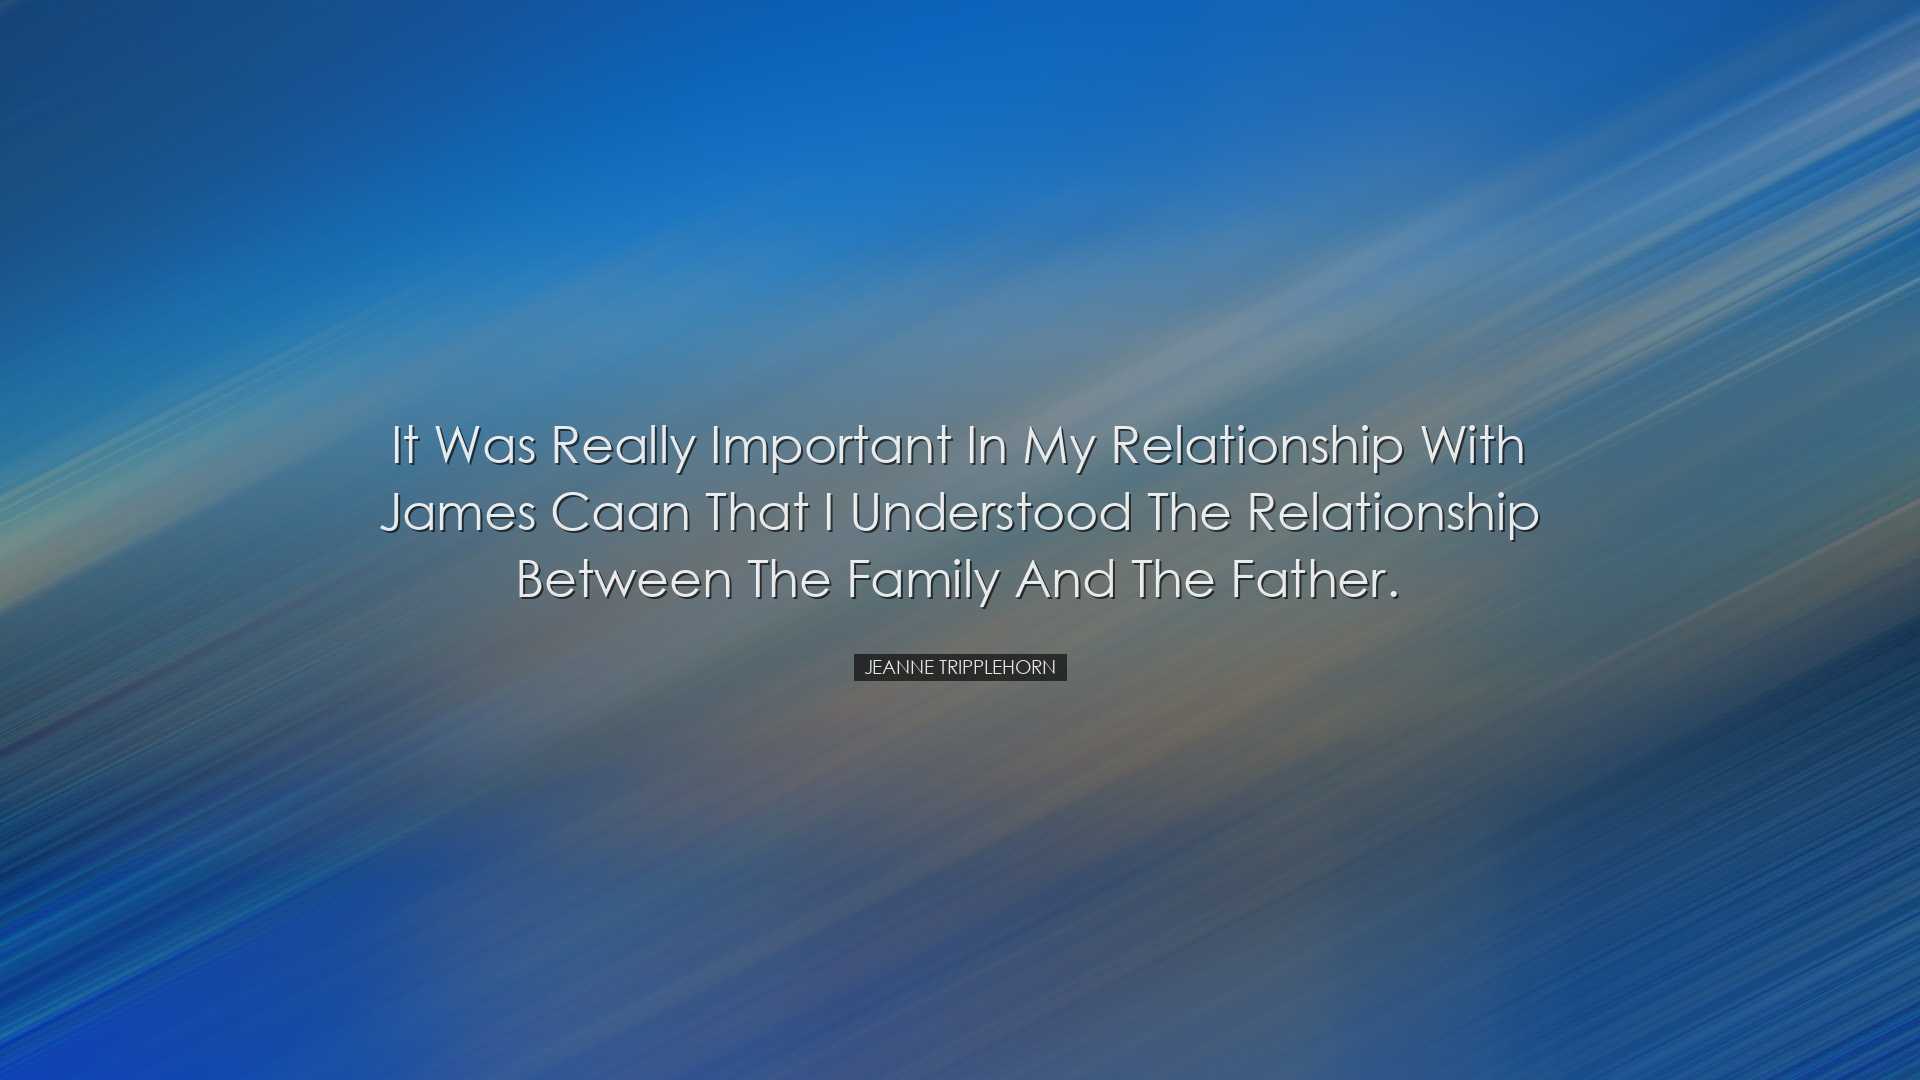 It was really important in my relationship with James Caan that I